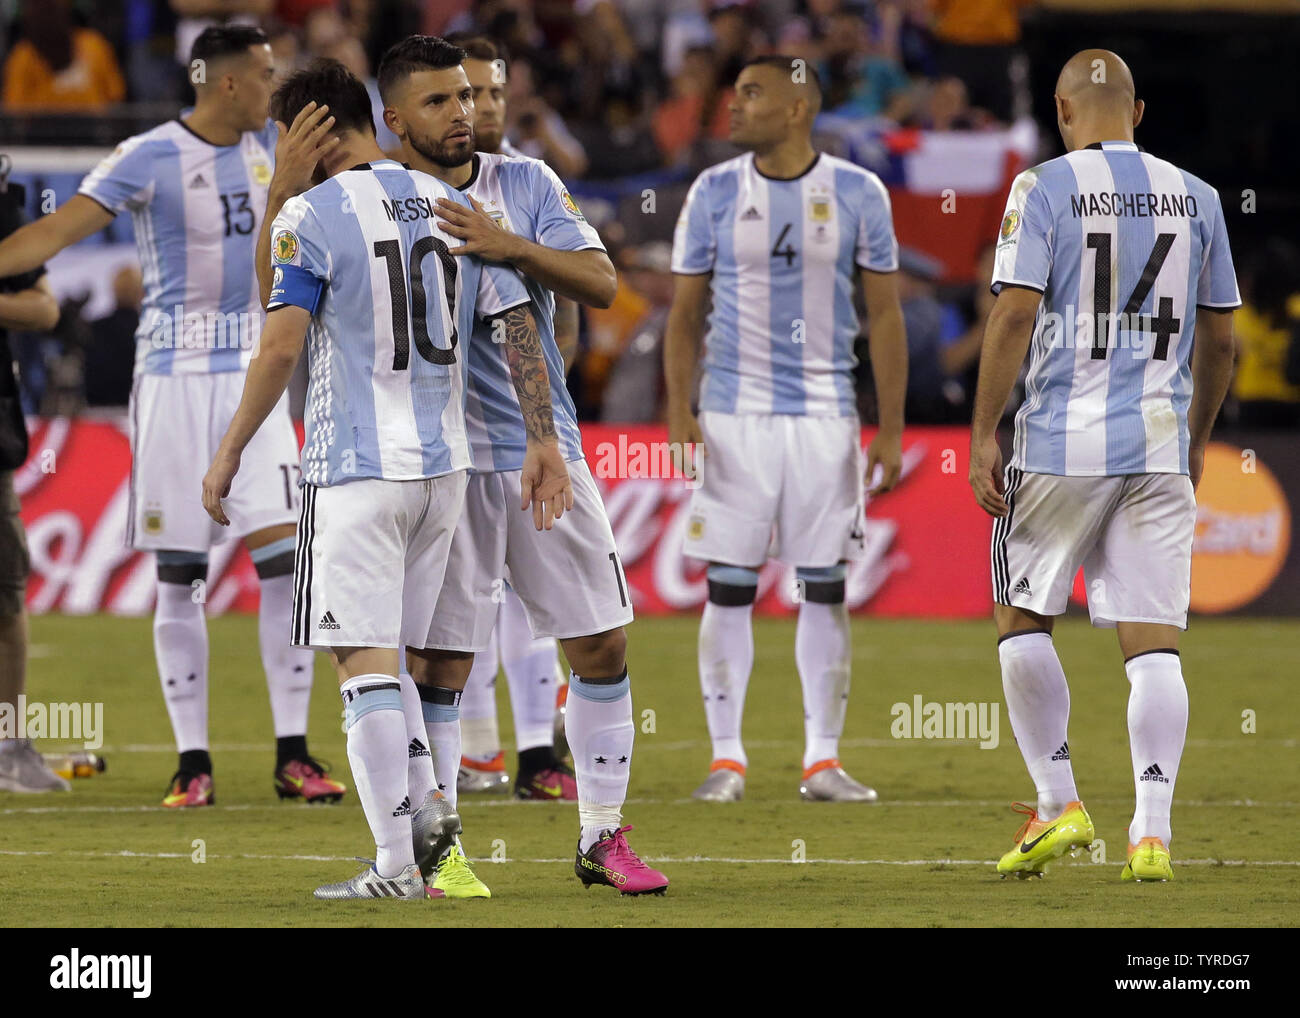 Argentina midfielder Lionel Messi (10) is consoled by forward Sergio Aguero (11) after he missed his shot in the penalty kicks phase at the Copa America Centenario USA 2016 Finals at MetLife Stadium in East Rutherford, New Jersey on June 26, 2016.  Chile won 4-2 in penalty kicks.    Photo by Ray Stubblebine/UPI Stock Photo